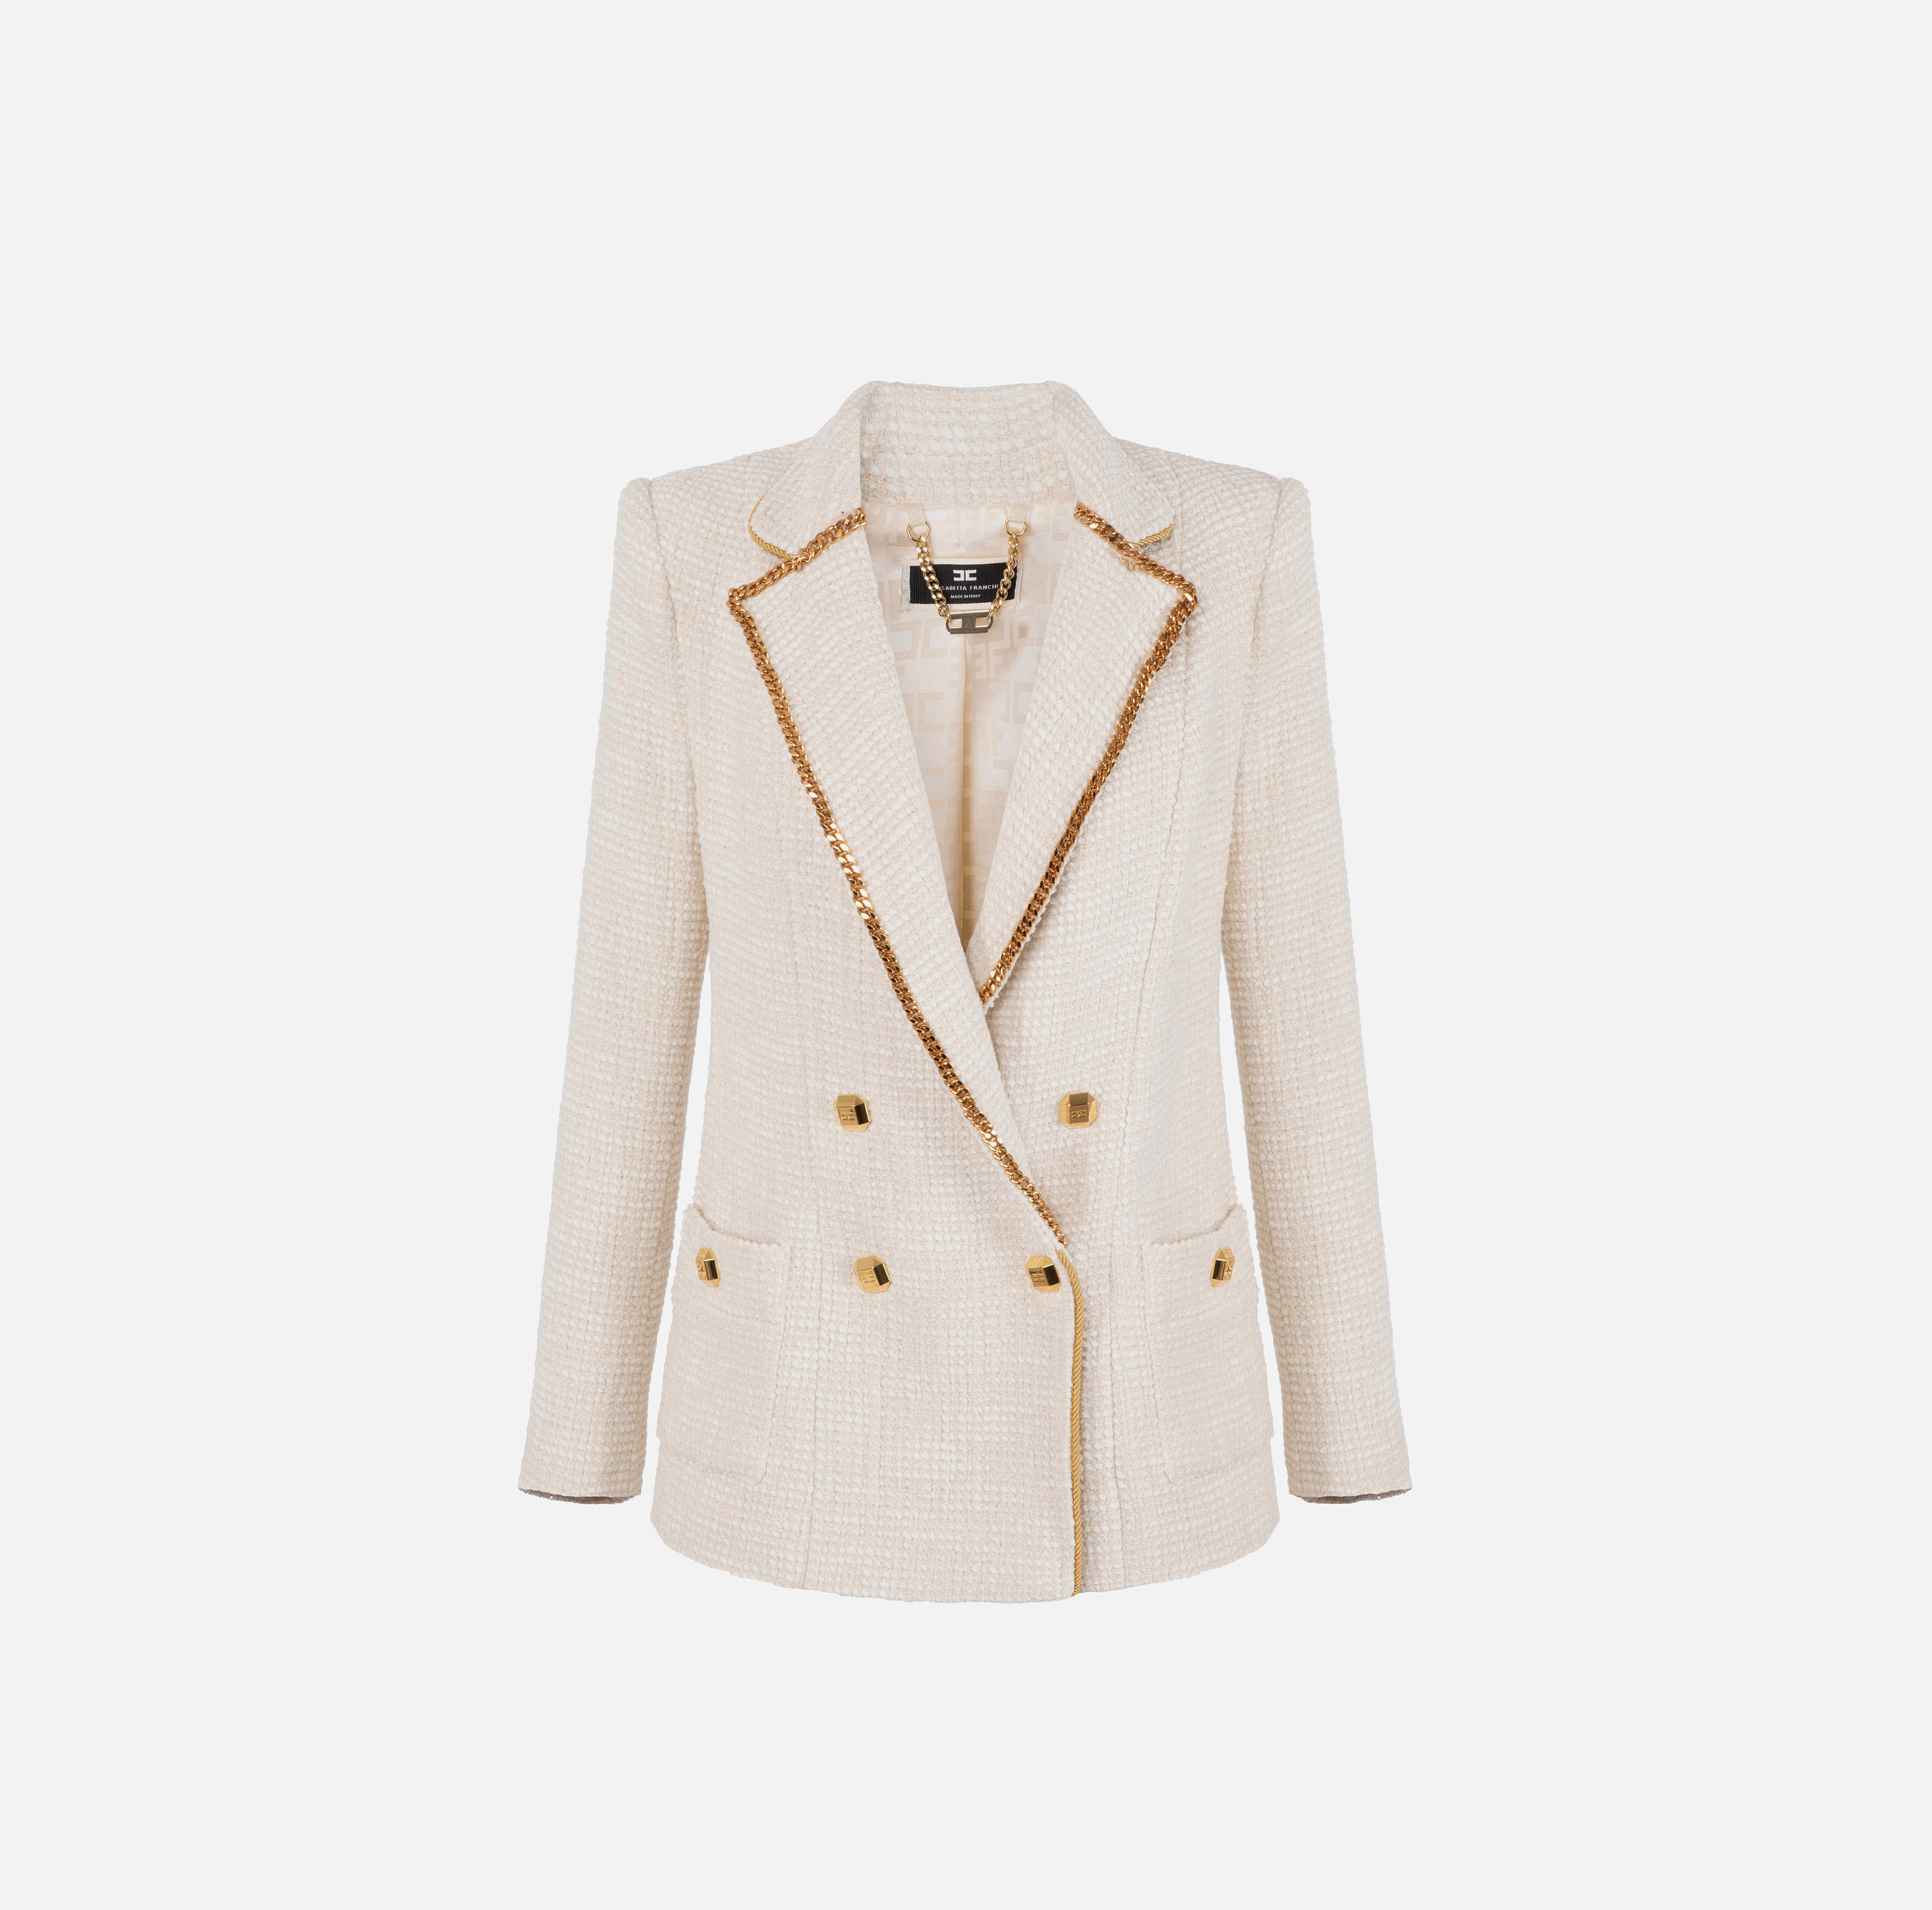 Elisabetta Franchi Double-Breasted Tweed Jacket with Chain